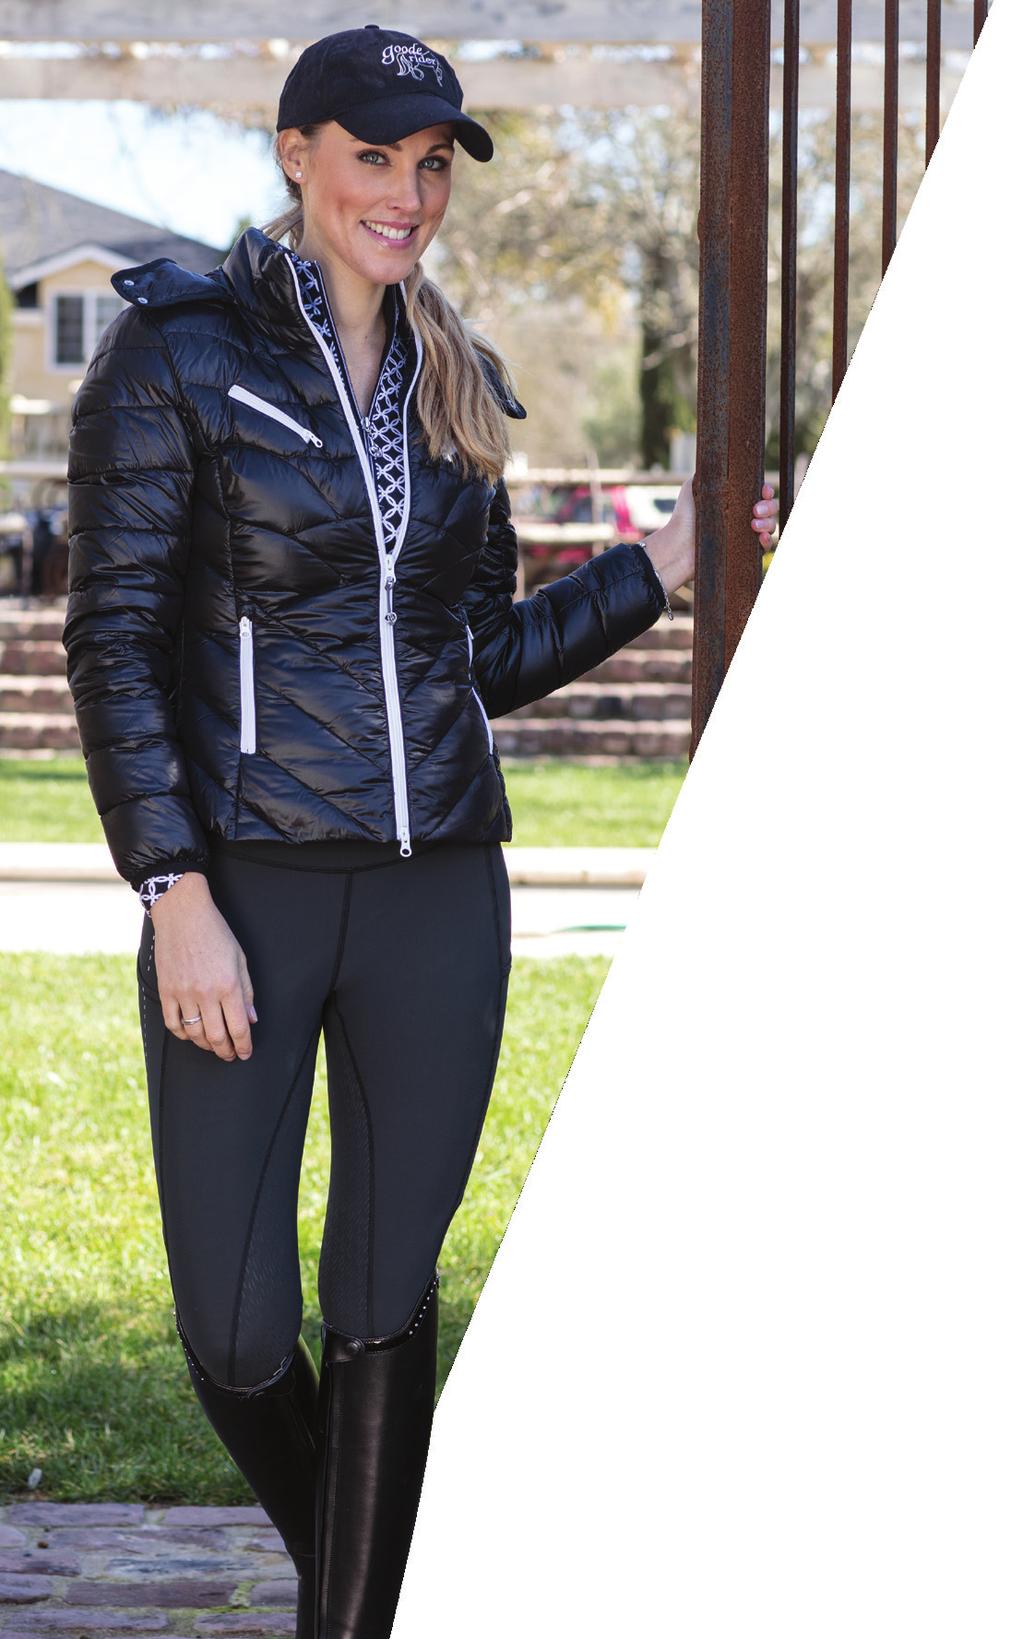 WOMEN jackets & coats jackets & coats WOMEN OUT AND ABOUT DOWN JACKET Style #: 16138 Sizes: XS